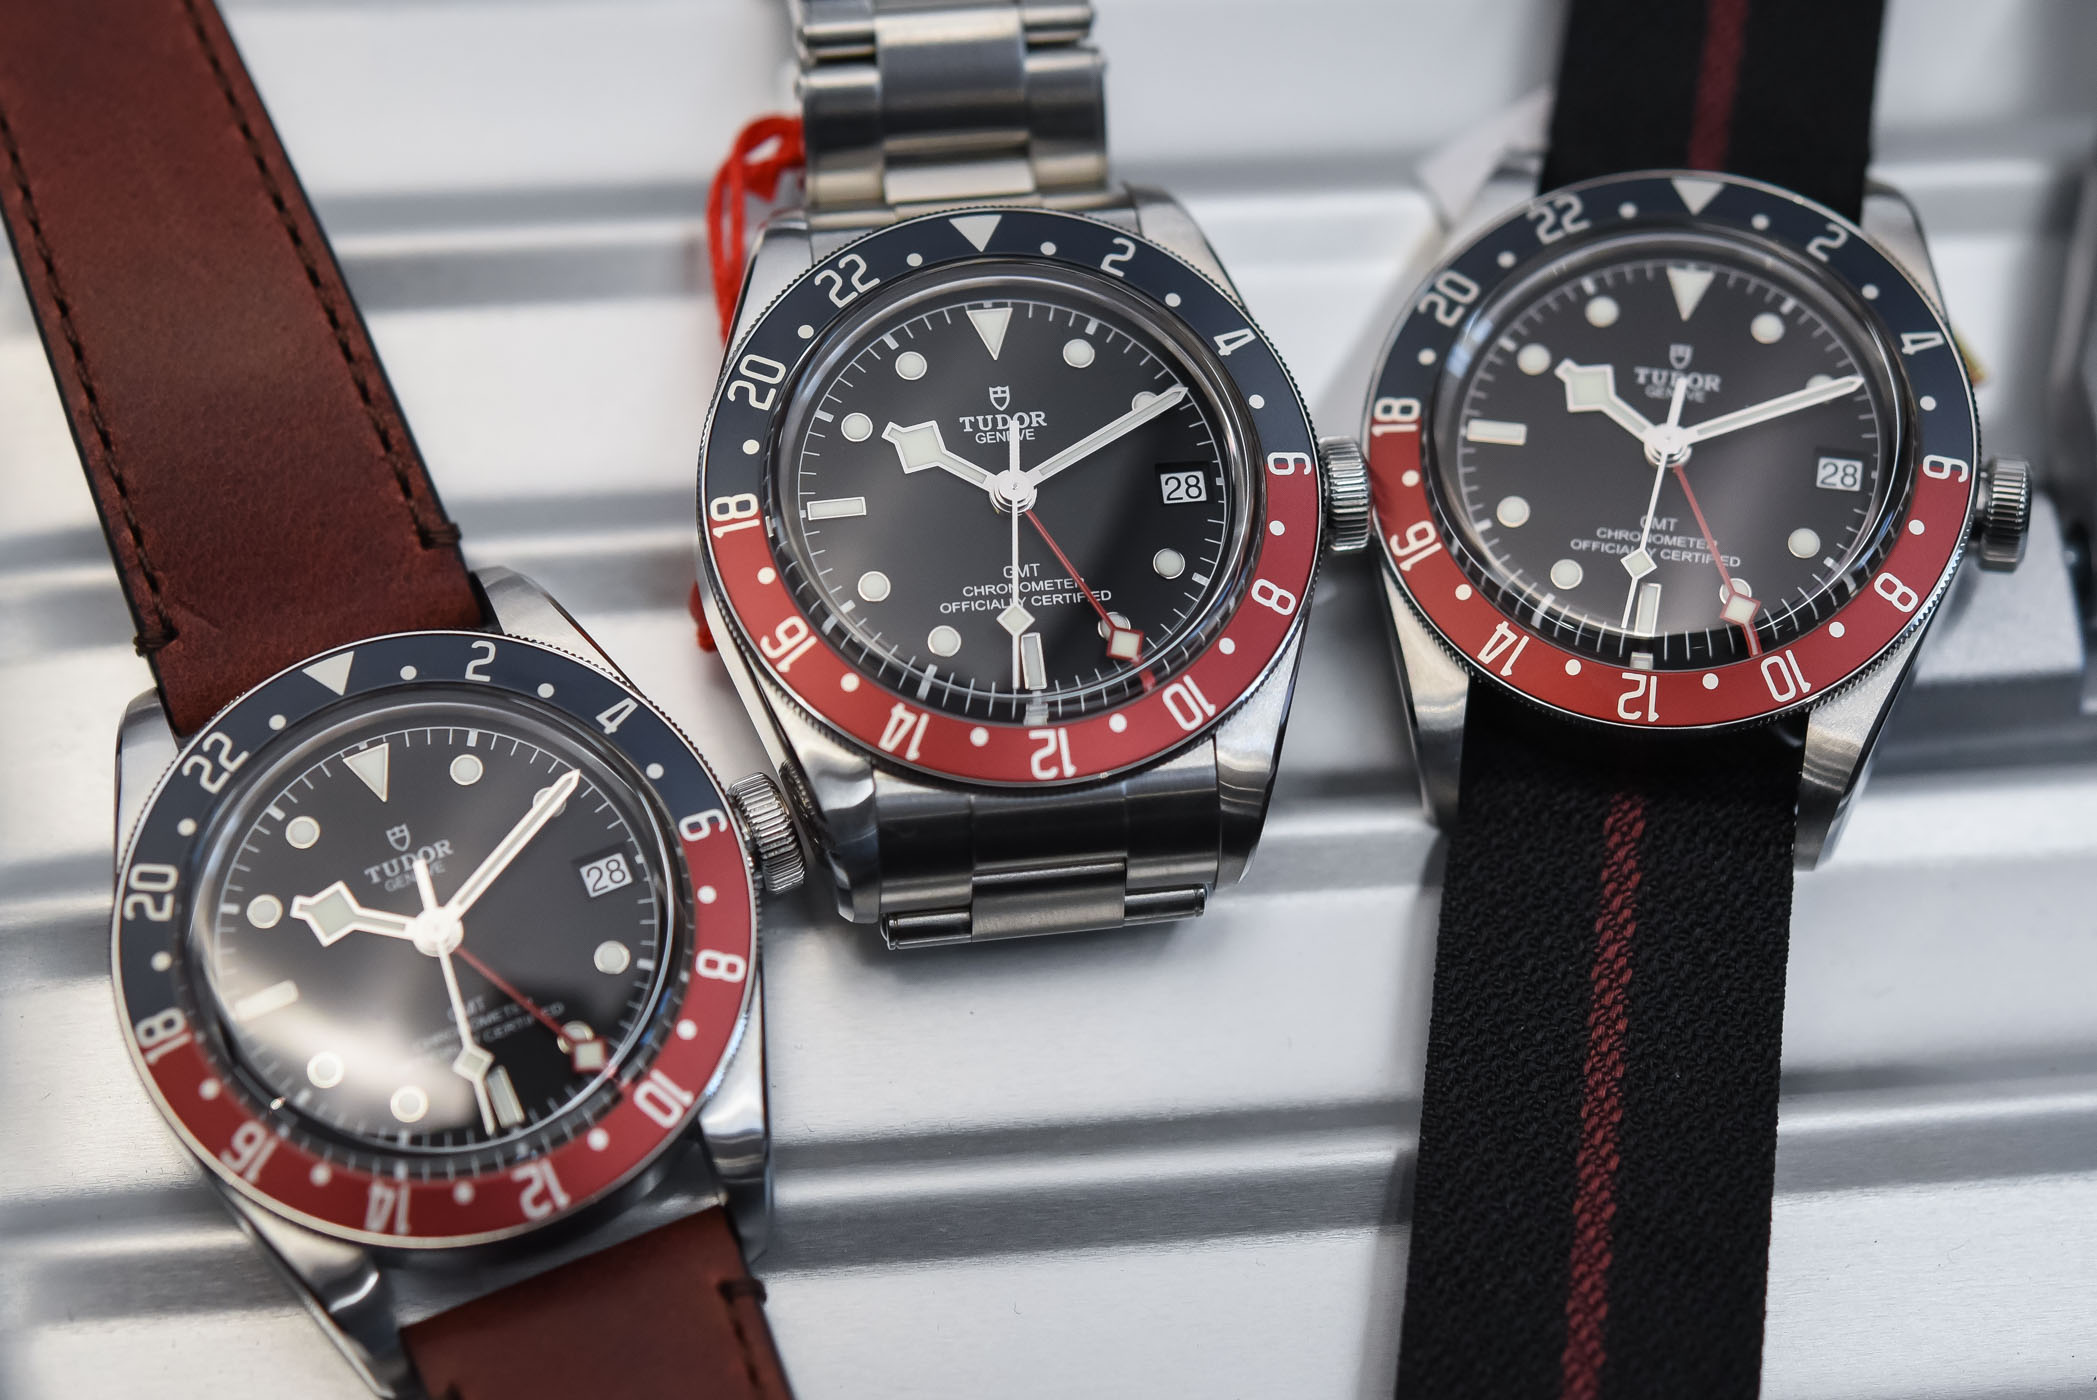 Best GMT Travellers watches Baselworld 2018 - Tudor Black Bay GMT Pepsi 79830RB